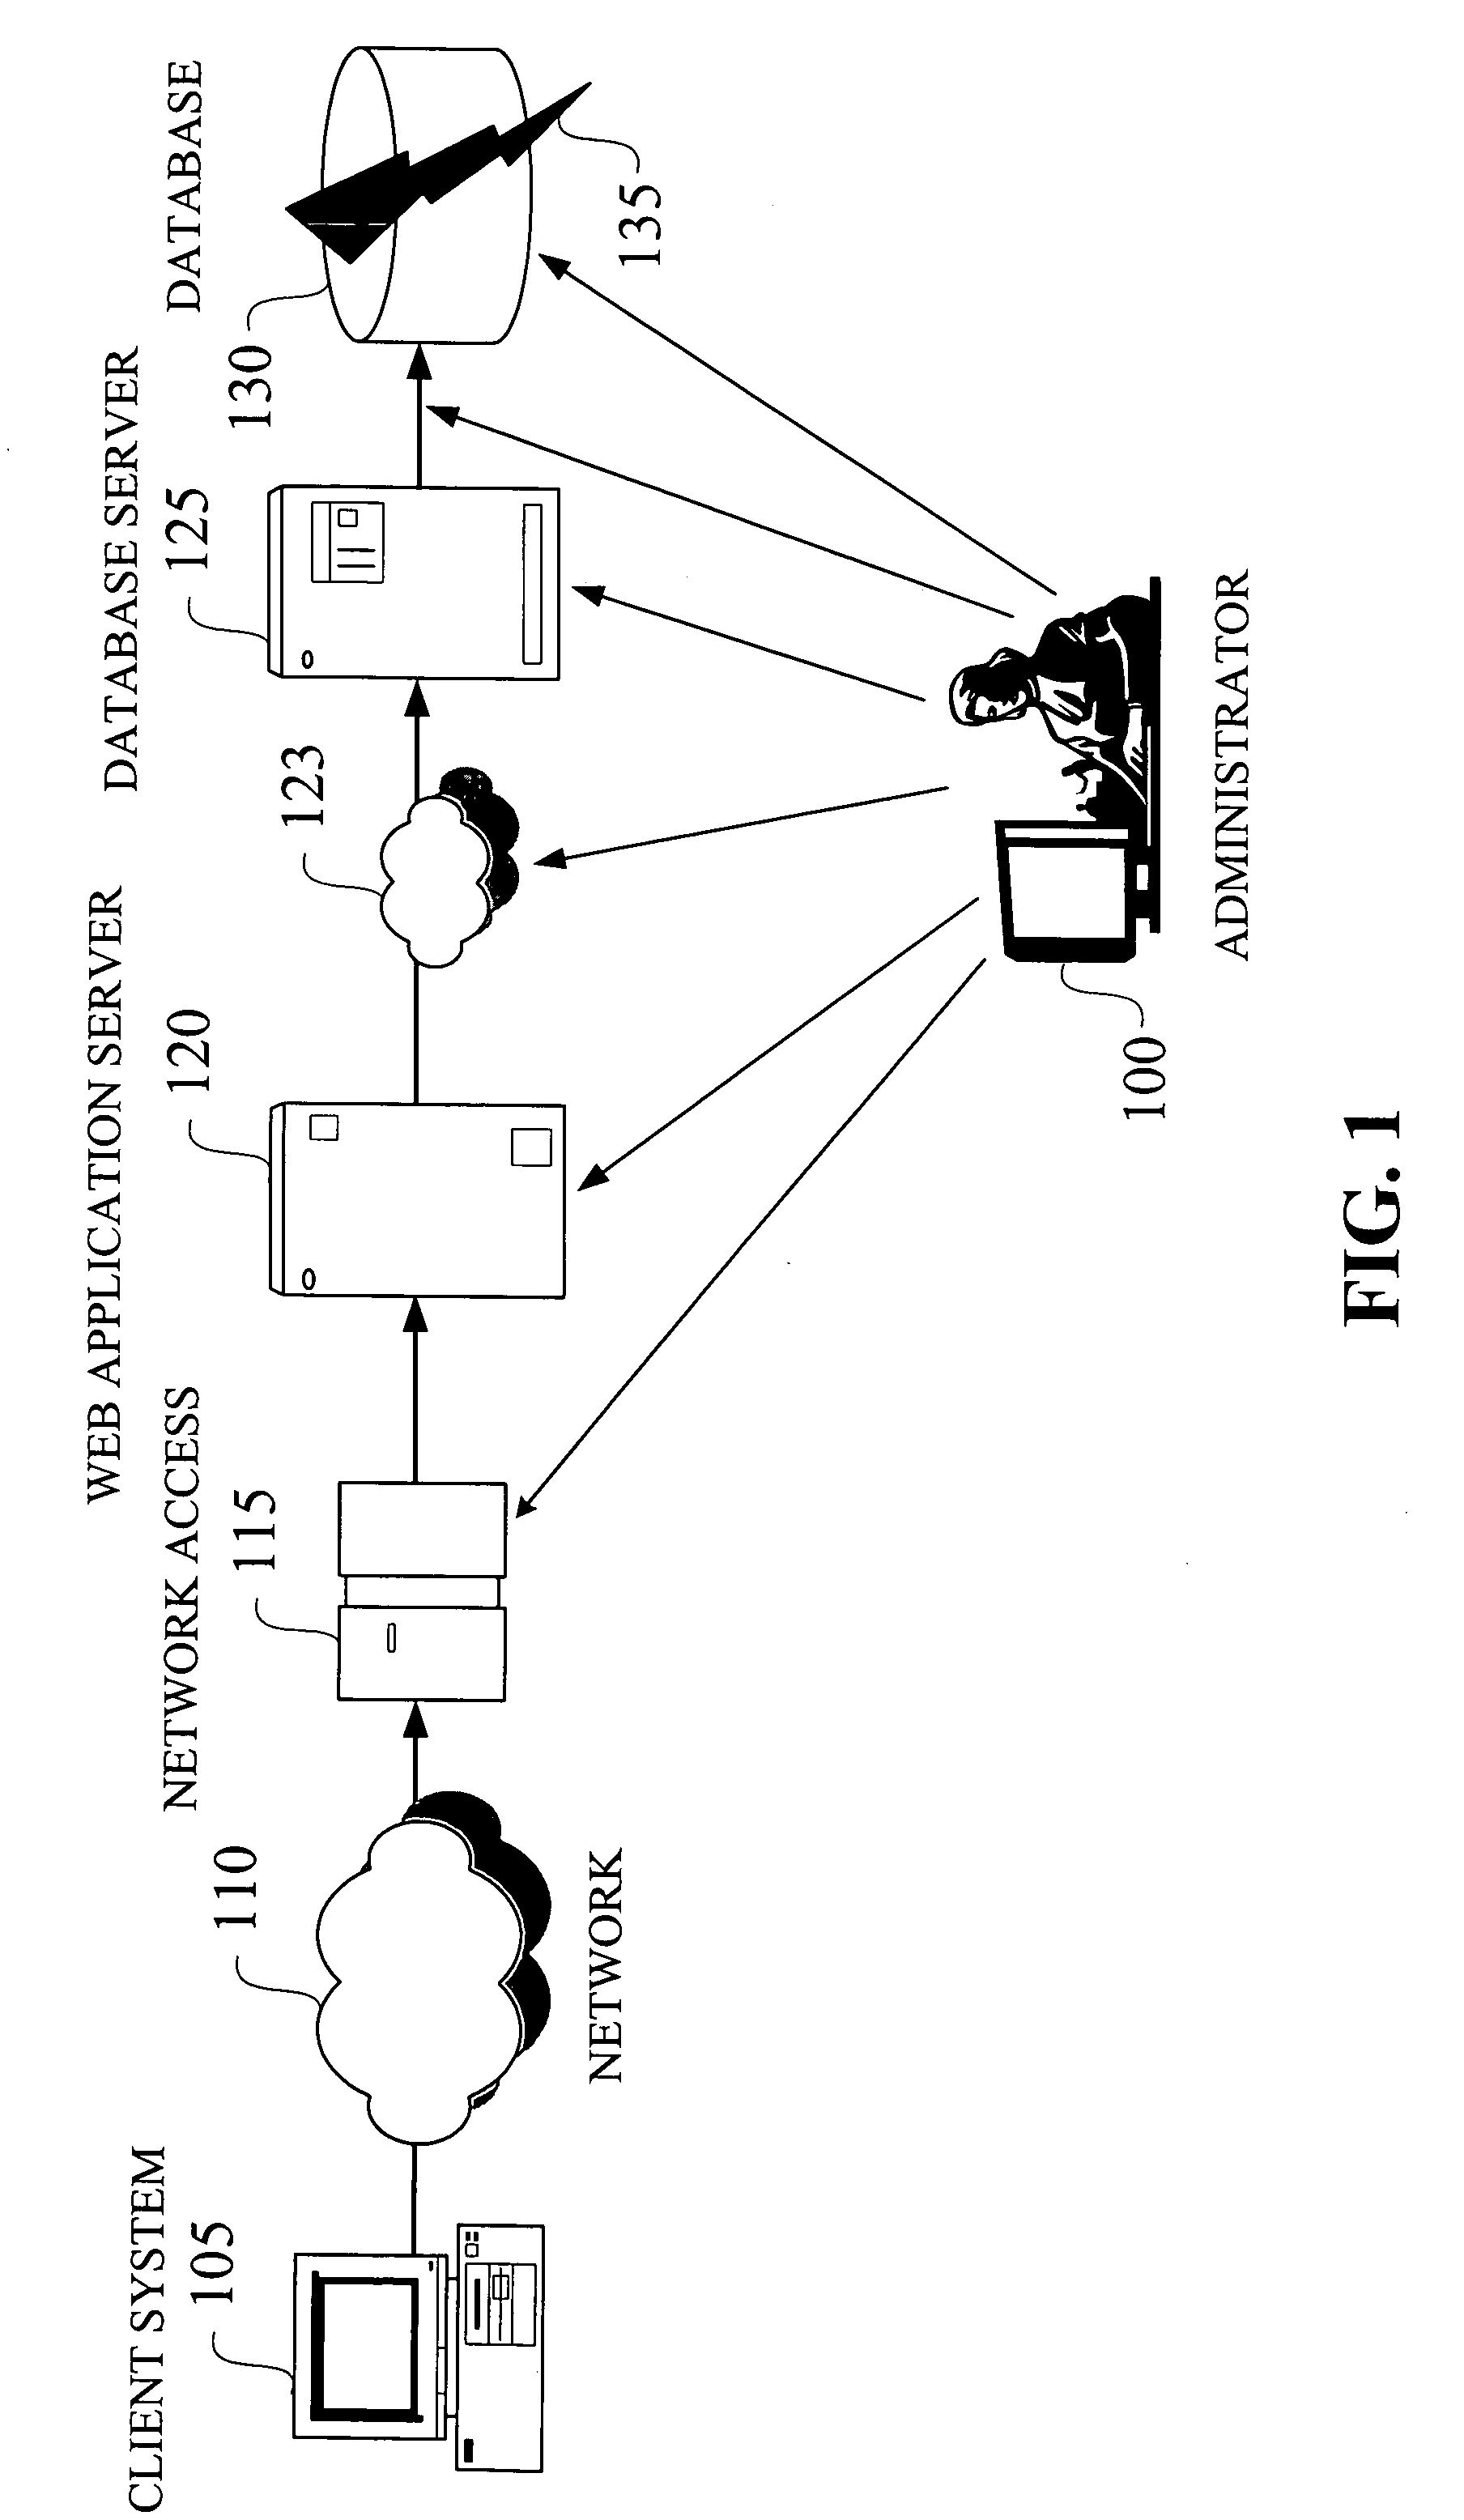 Methods and apparatus for topology discovery and representation of distributed applications and services